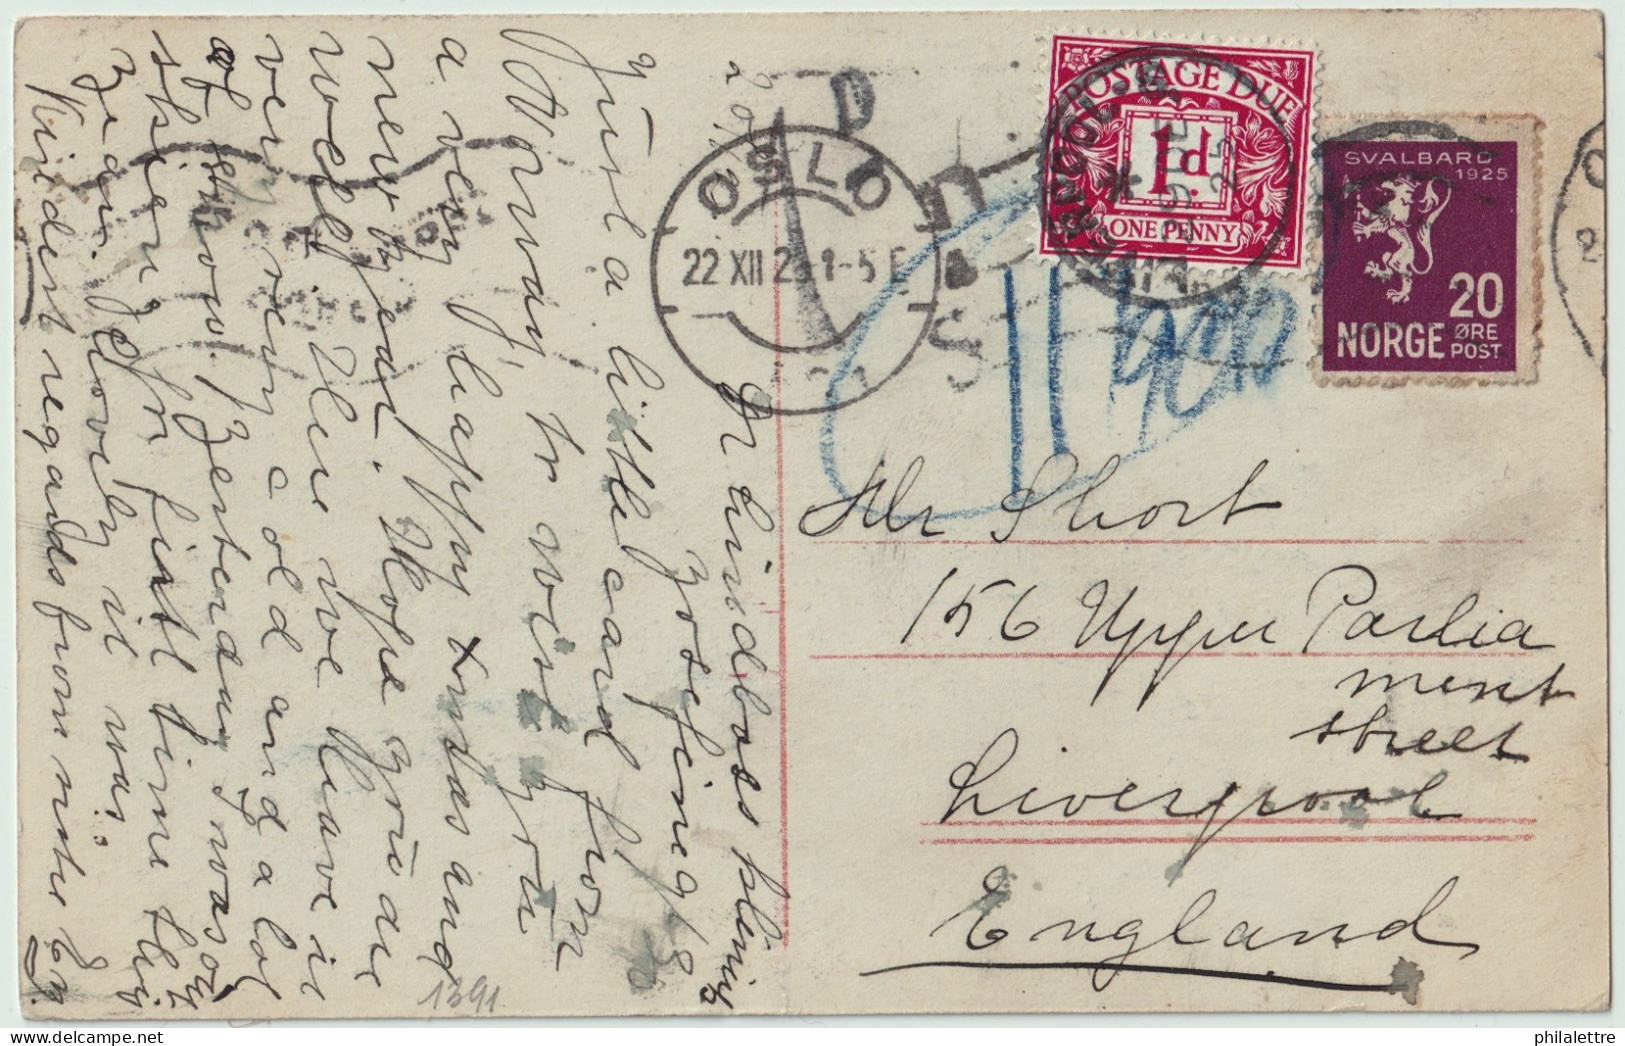 ROYAUME-UNI / UK - SG D11 On 1925 DENMARK To GB Underpaid Postage Due OSLO PPC To LIVERPOOL Franked 20 ör SVALBARD Issue - Postage Due